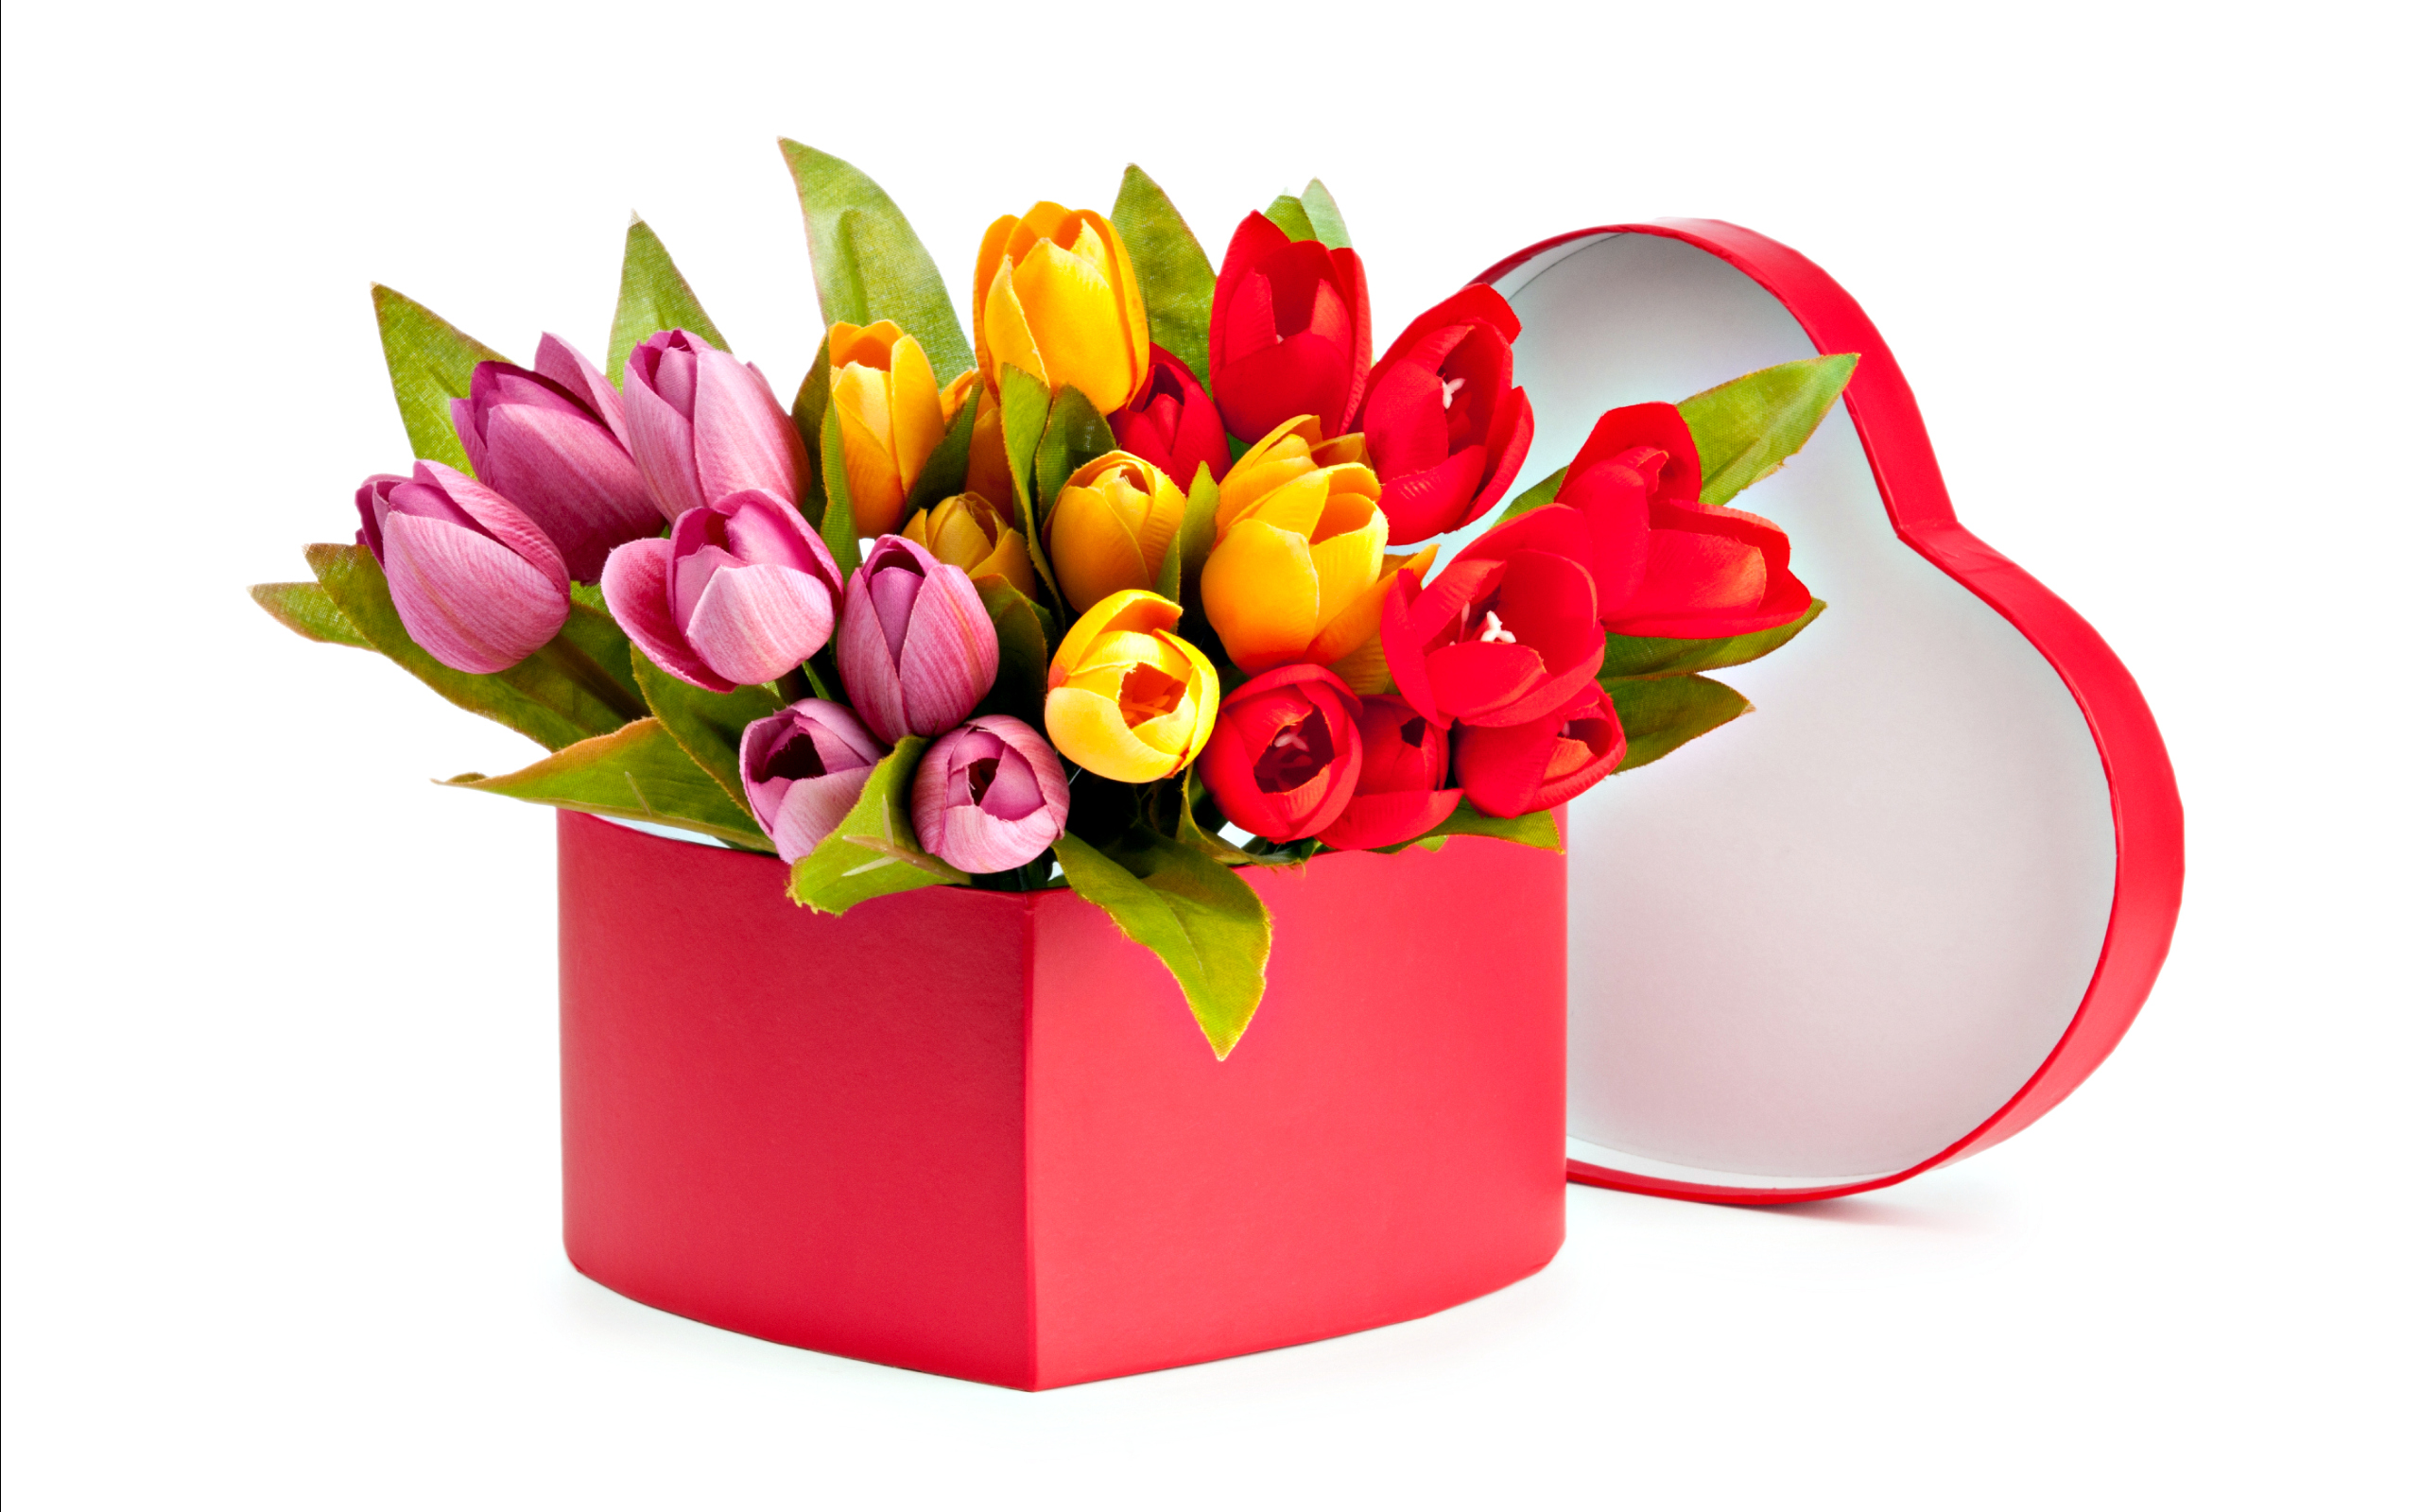 red flower, man made, flower, box, colorful, colors, pink flower, tulip, yellow flower images